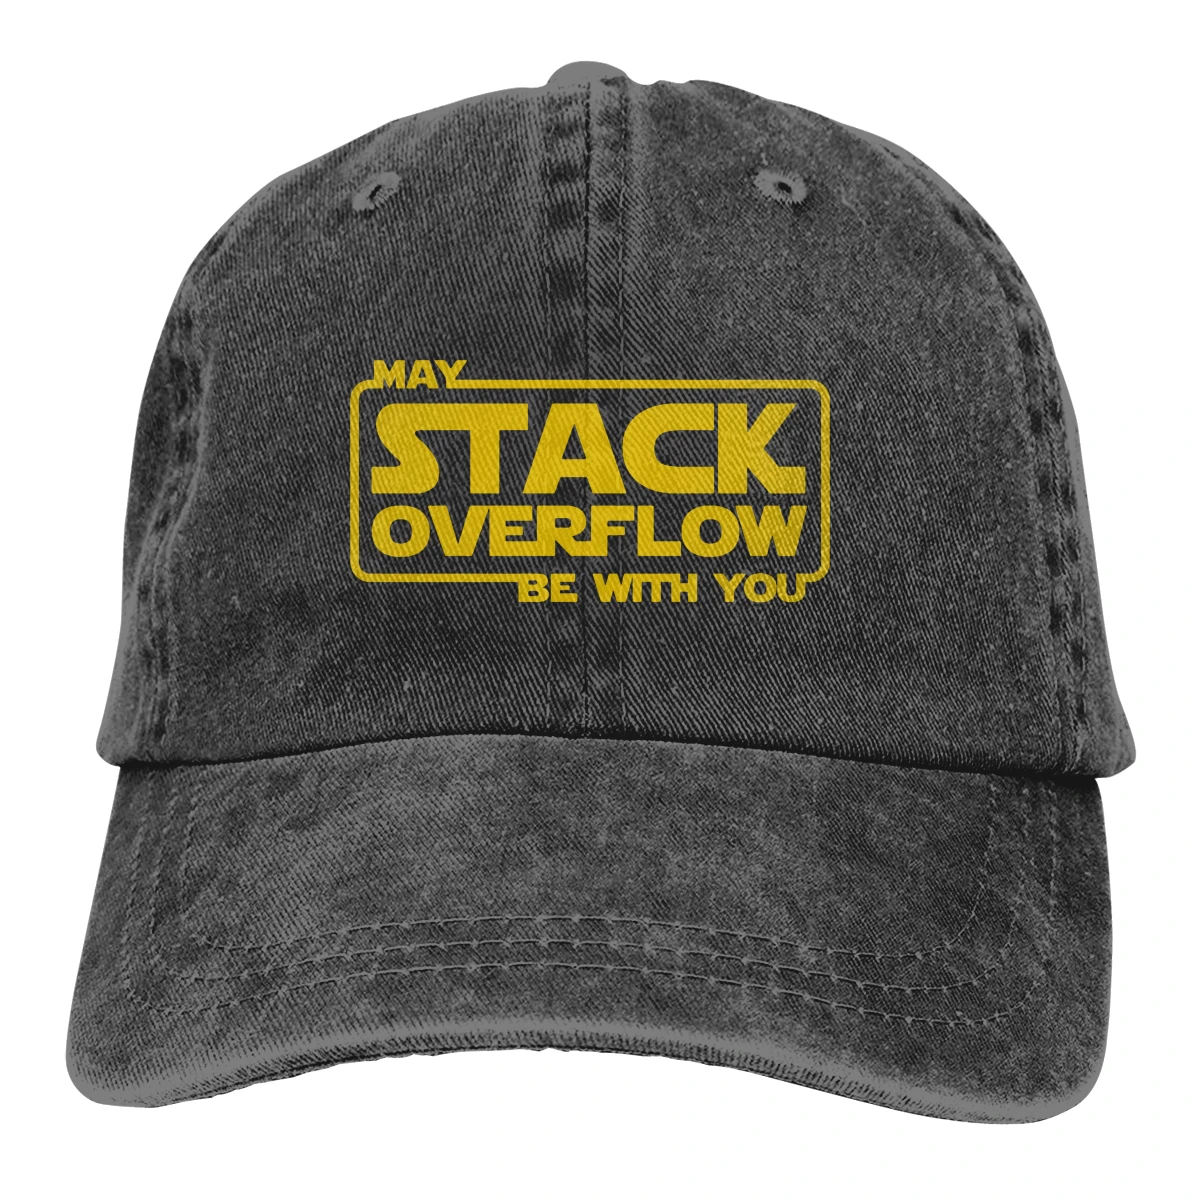 

Summer Cap Sun Visor Stack Overflow With You Hip Hop Caps Linux Operating System Tux Penguin Cowboy Hat Peaked Hats